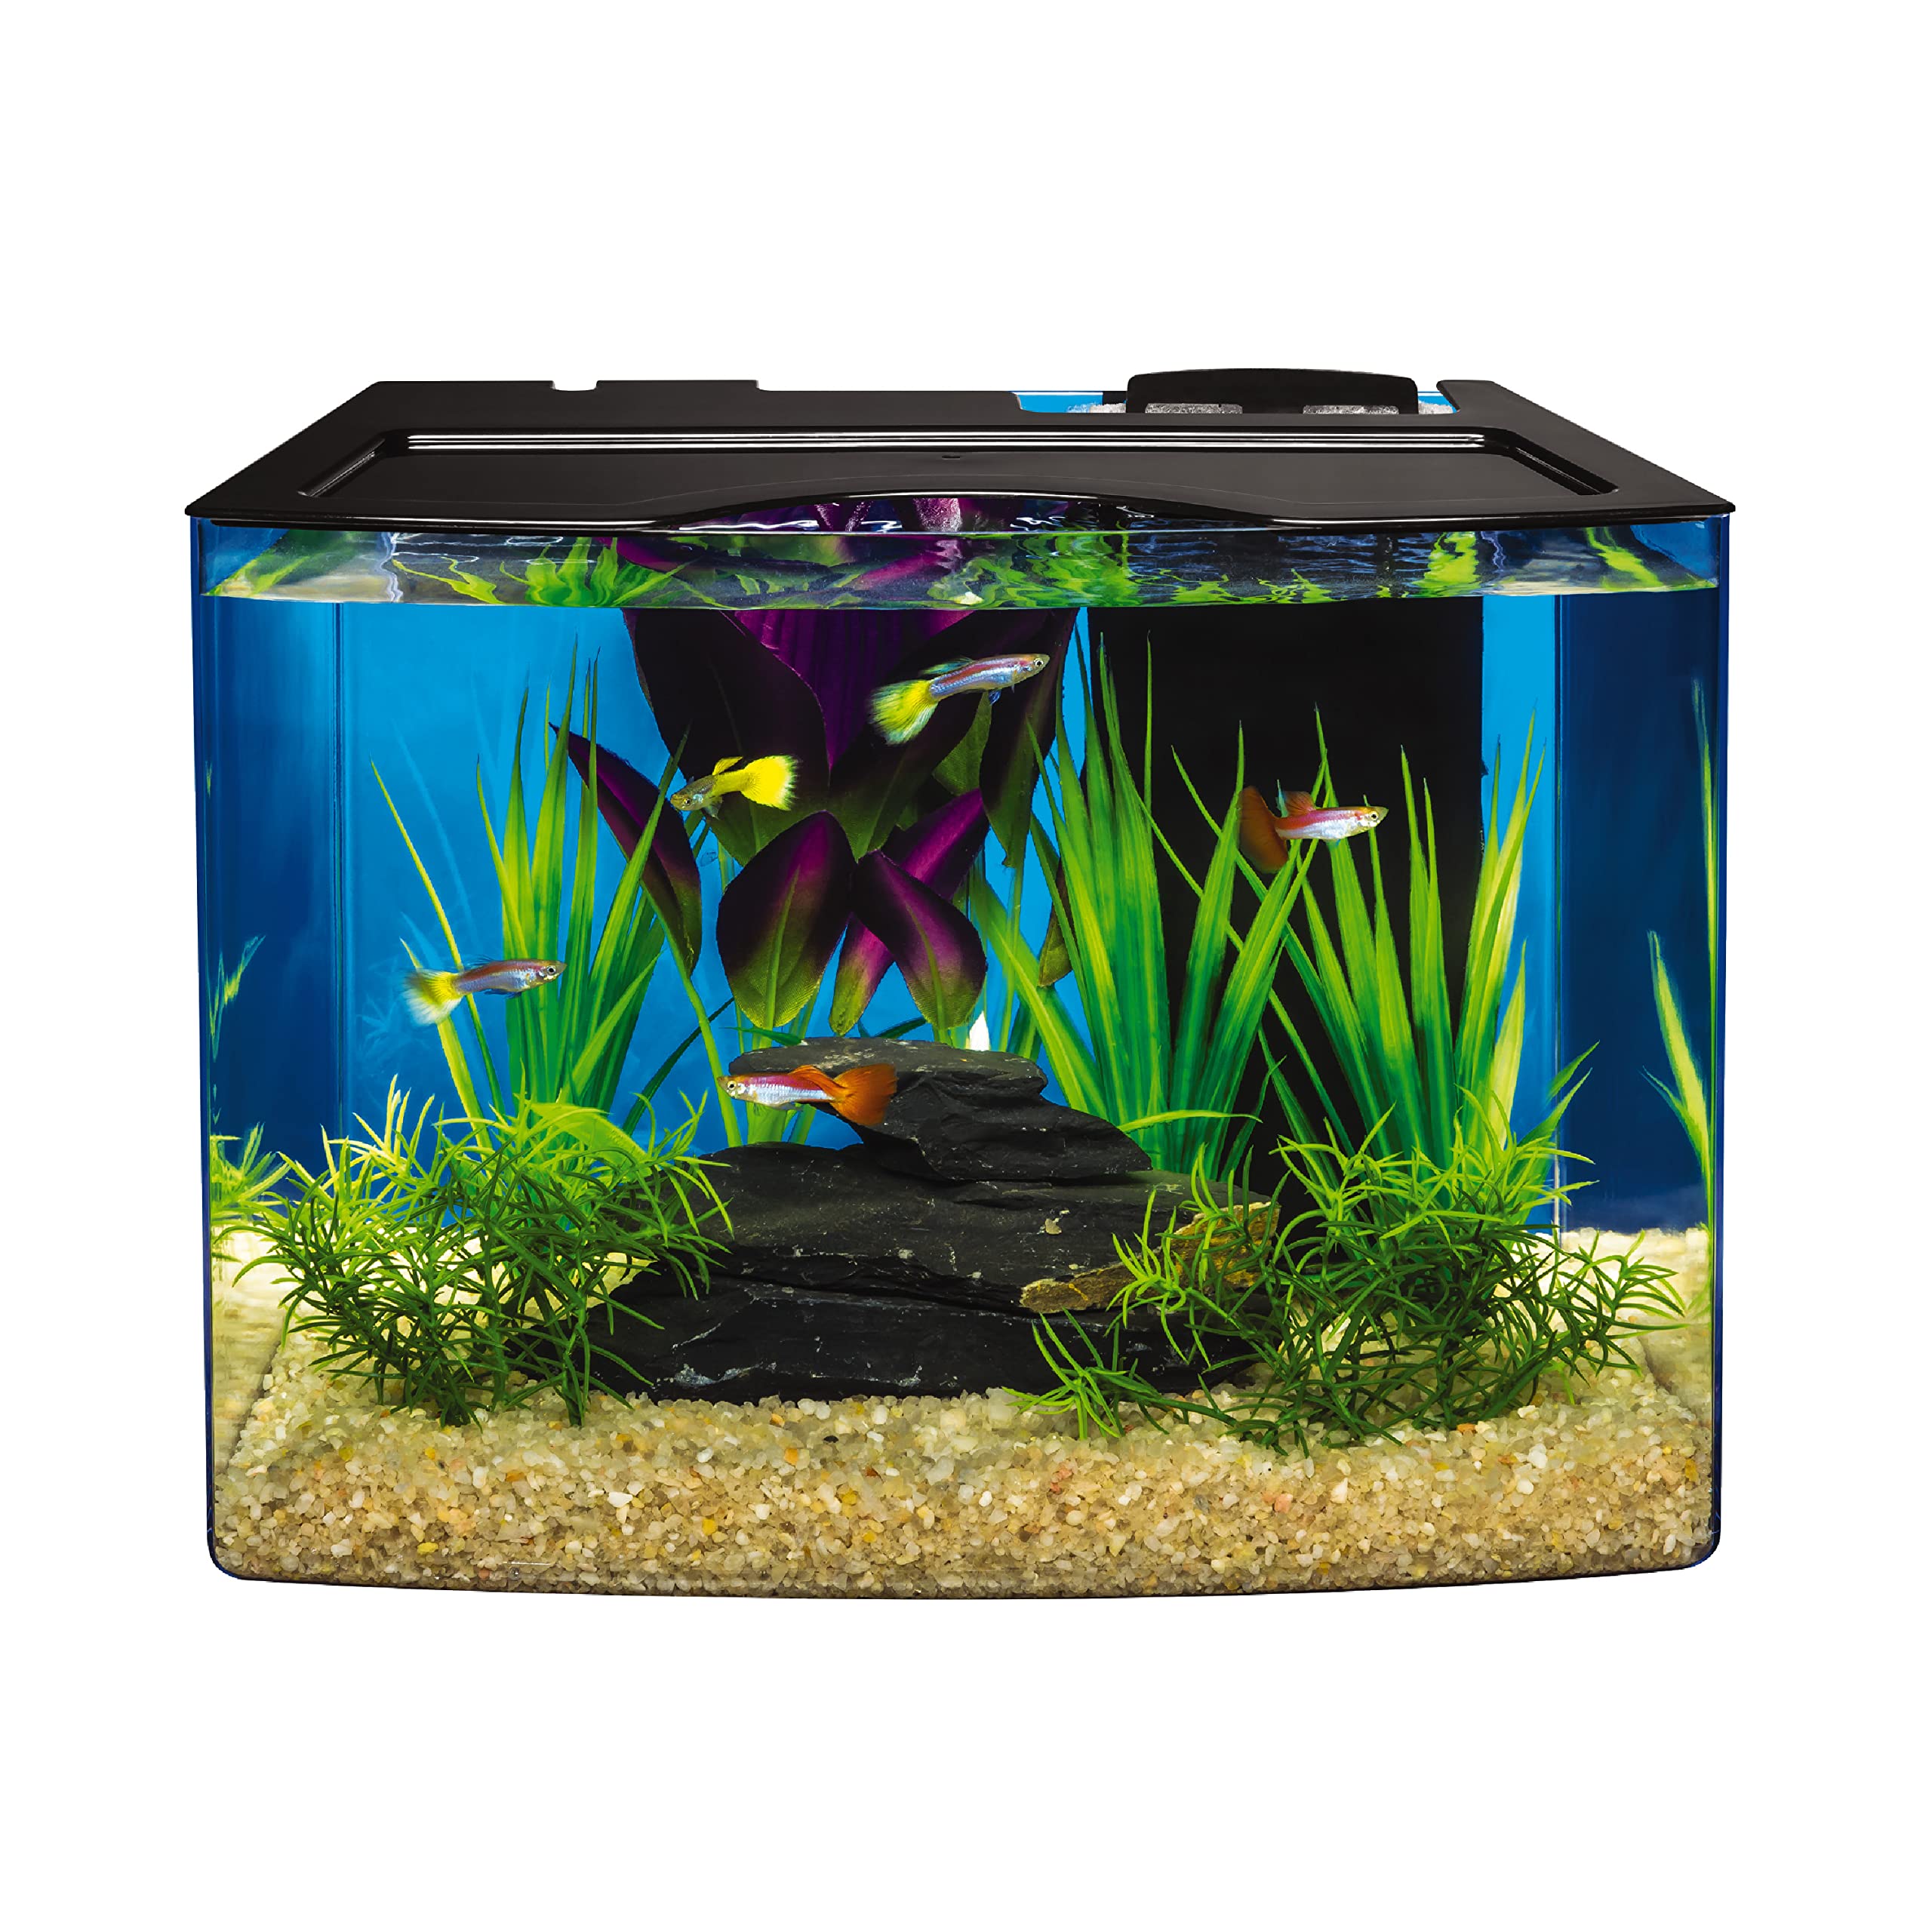 Tetra Crescent 5 Gallon Aquarium Kit with Curved-Front Tank and LEDs, Black.